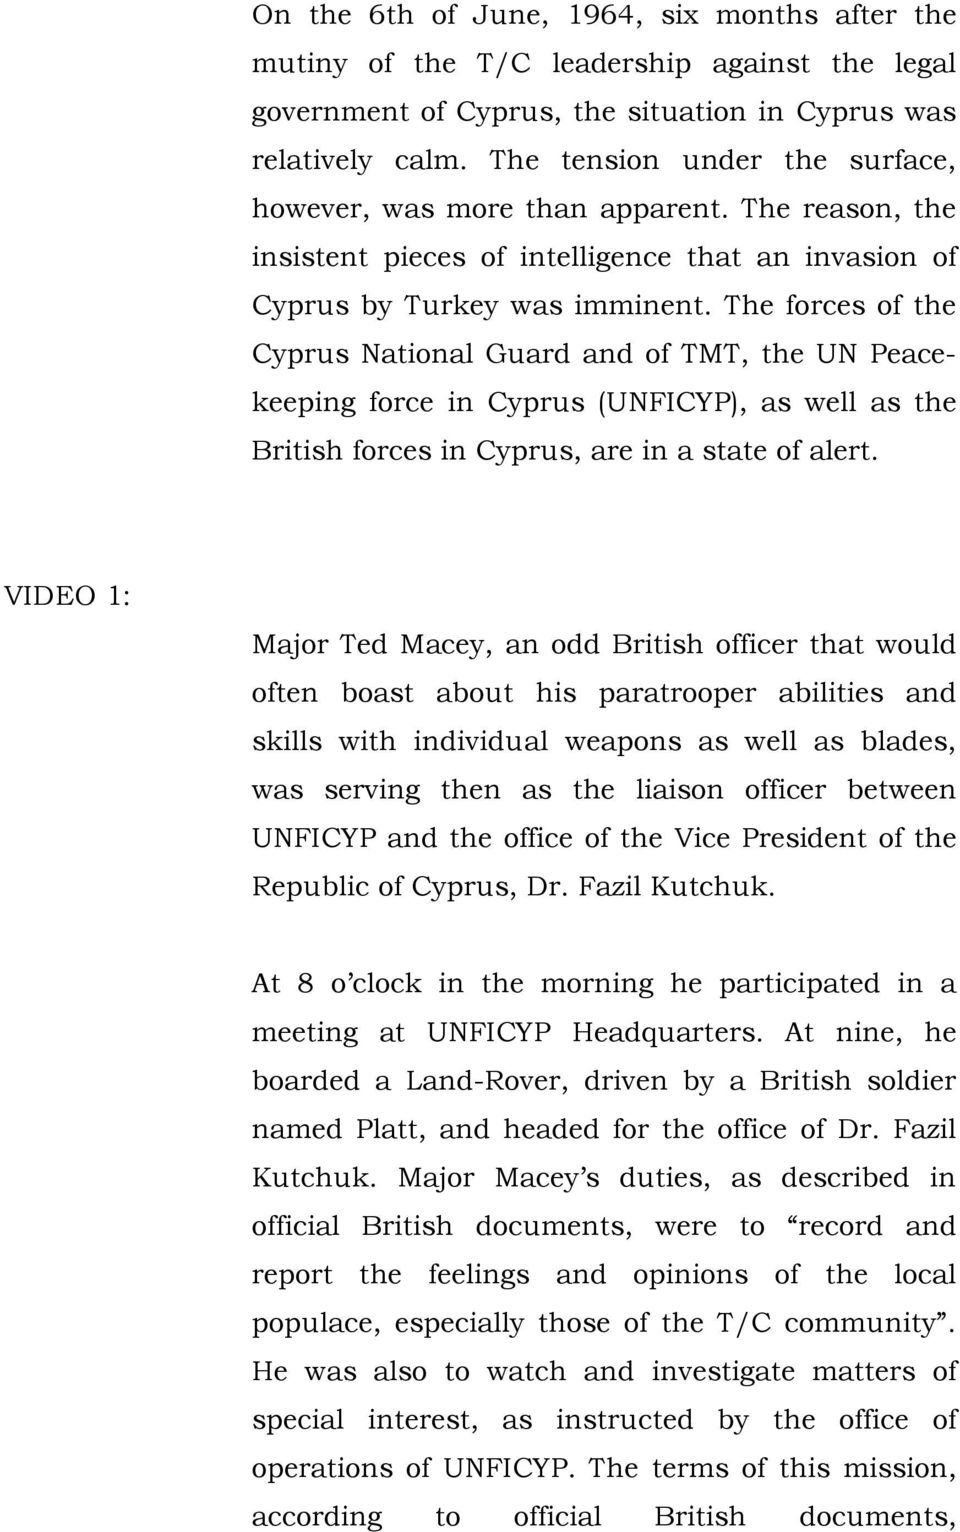 The forces of the Cyprus National Guard and of TMT, the UN Peacekeeping force in Cyprus (UNFICYP), as well as the British forces in Cyprus, are in a state of alert.